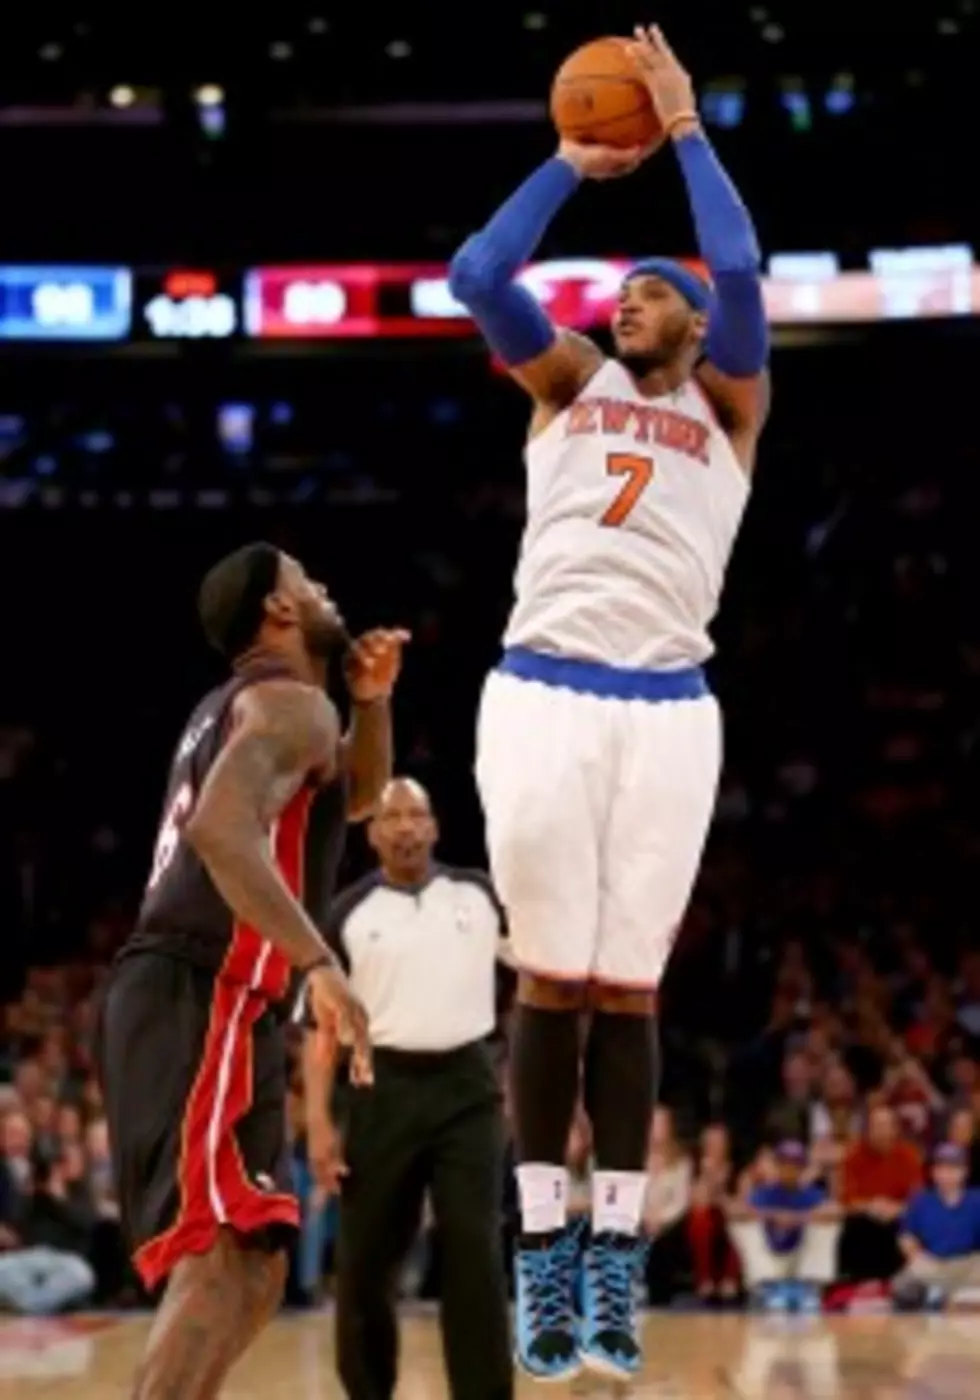 Could Carmelo Anthony join LeBron James and Co. in Miami?